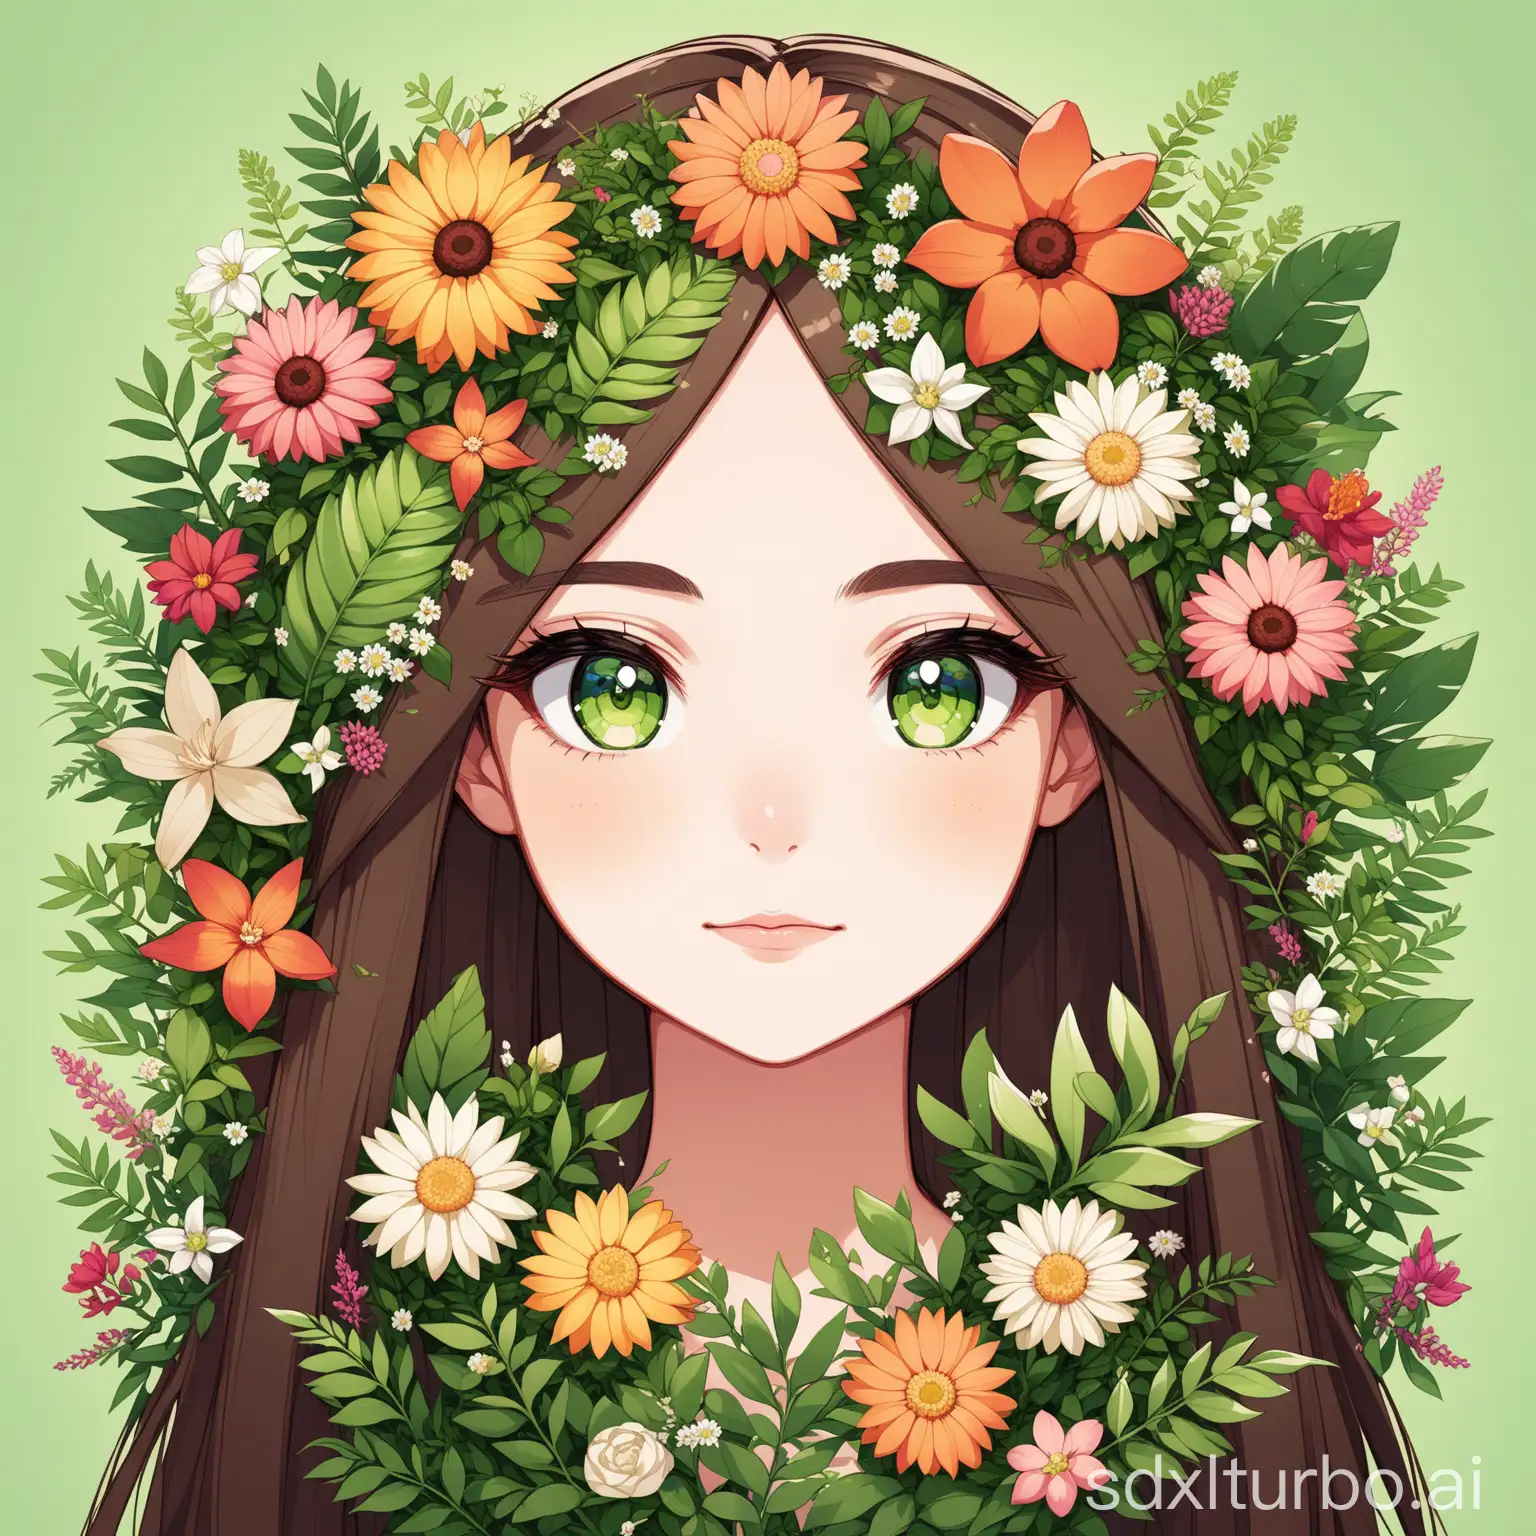 Cartoon-Portrait-of-a-Girl-Crafted-from-Flowers-and-Plant-Specimens